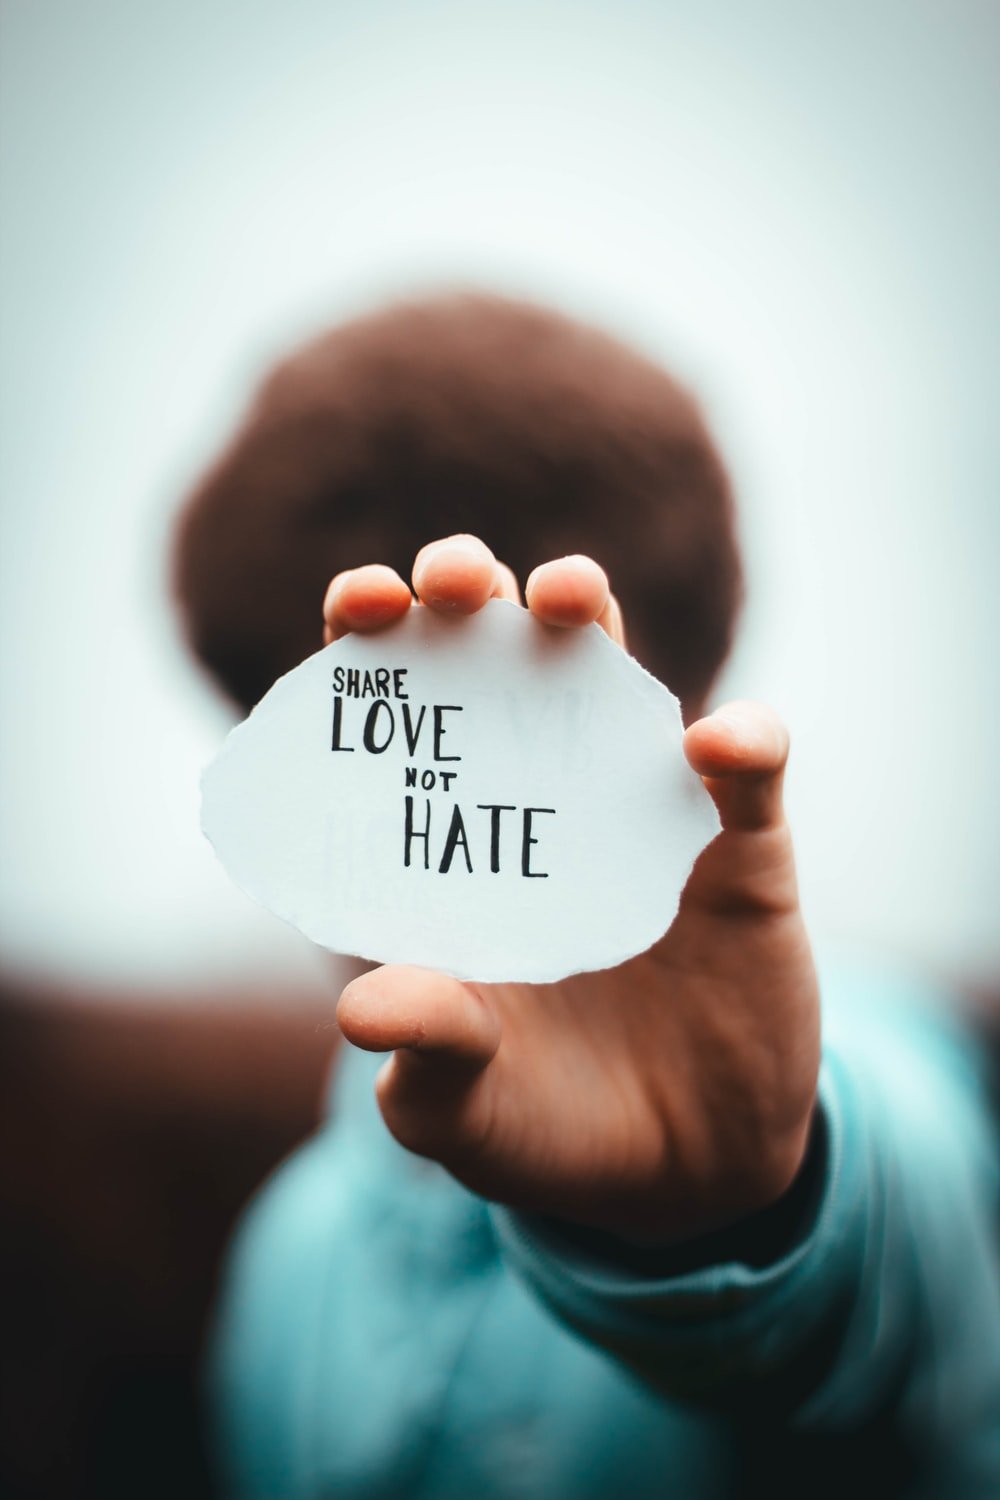 Love And Hate Picture. Download Free Image